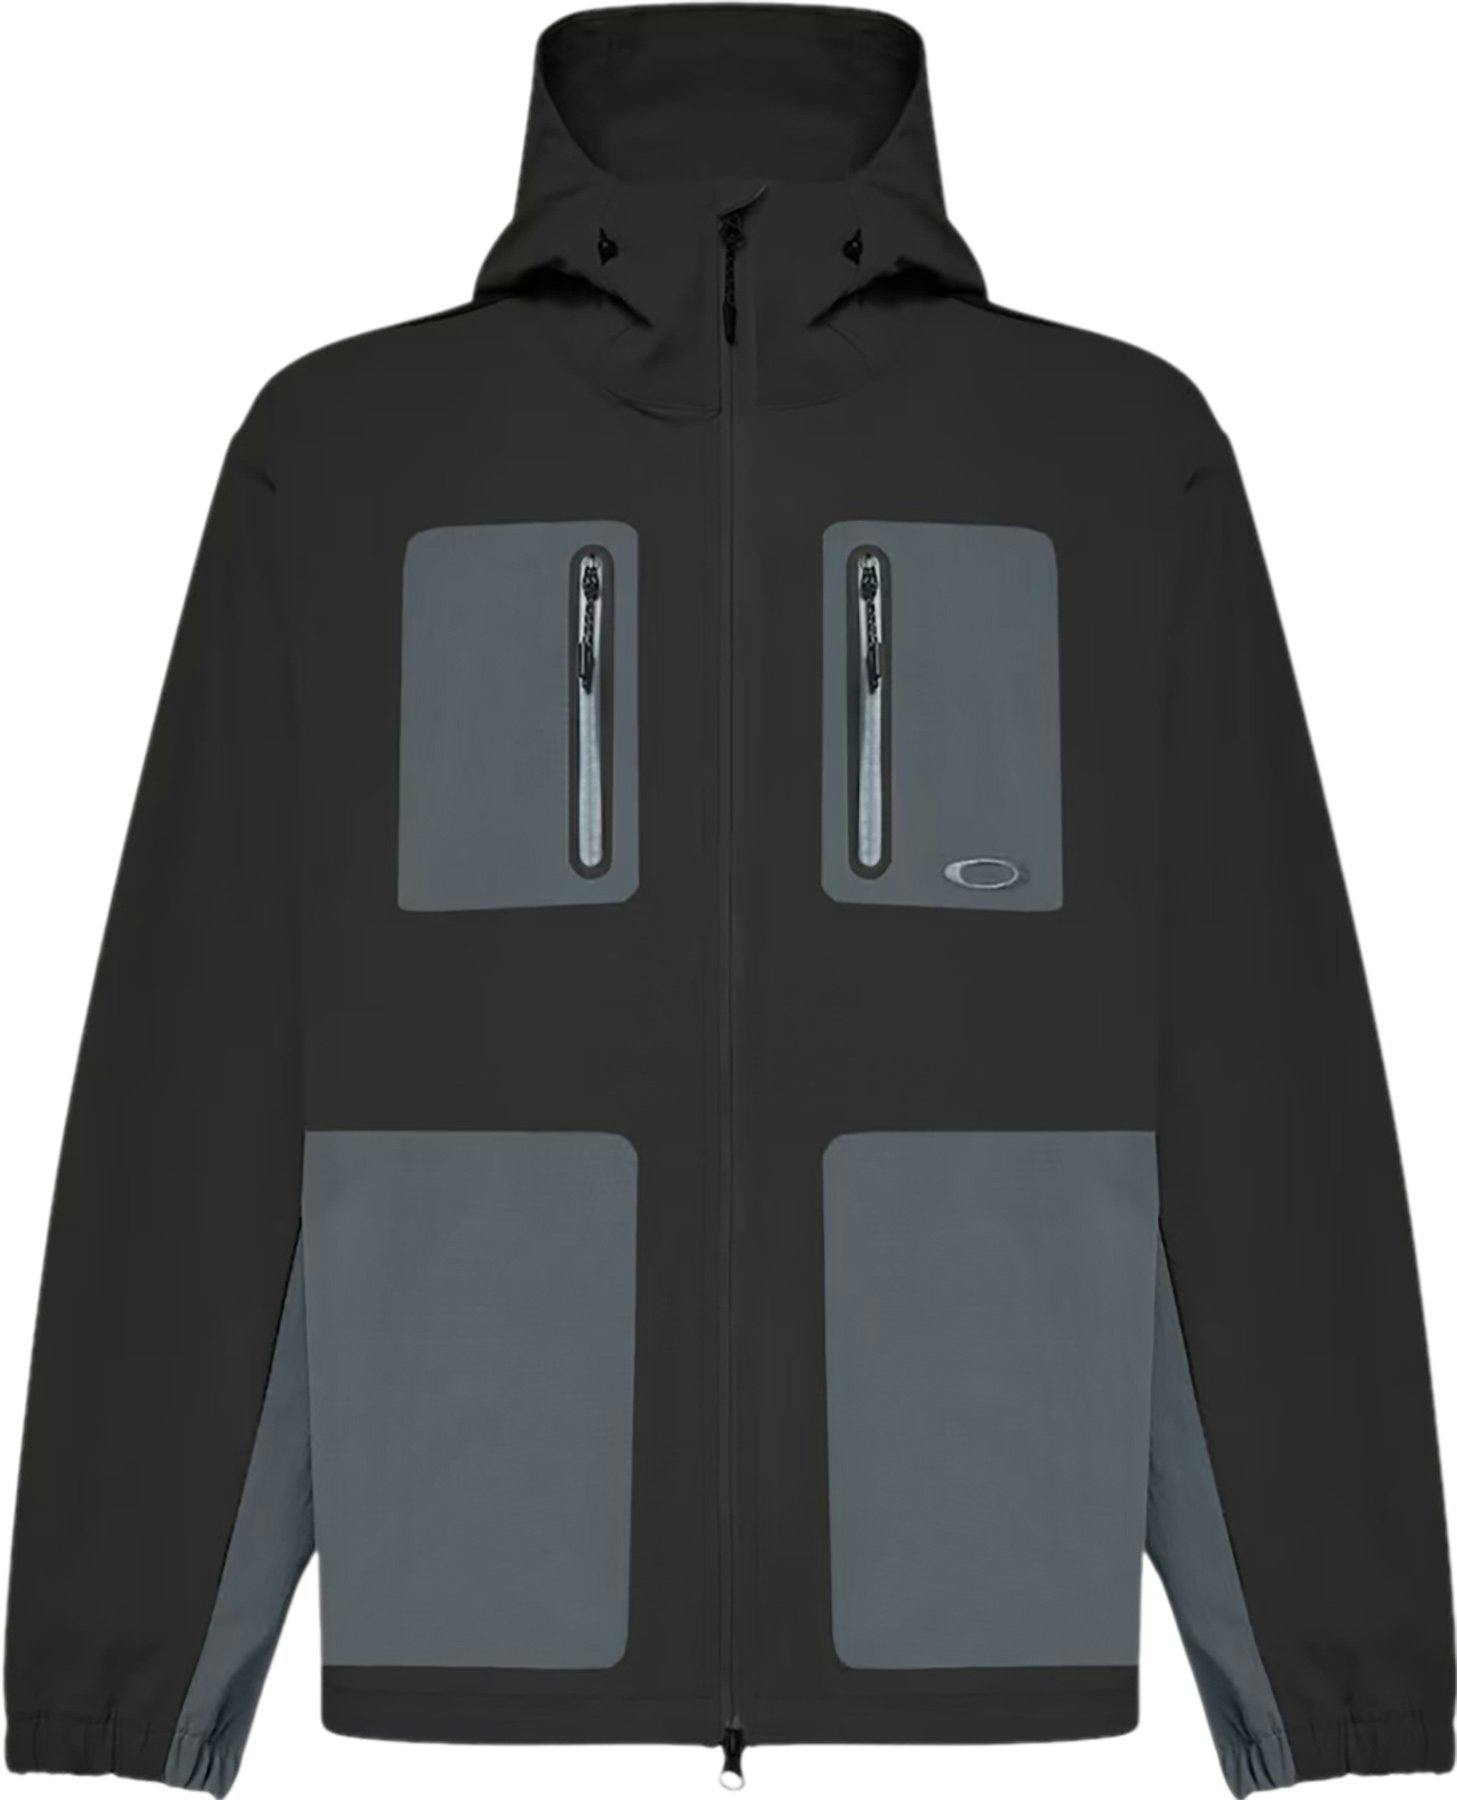 Product image for Latitude Drill Jacket - Men's